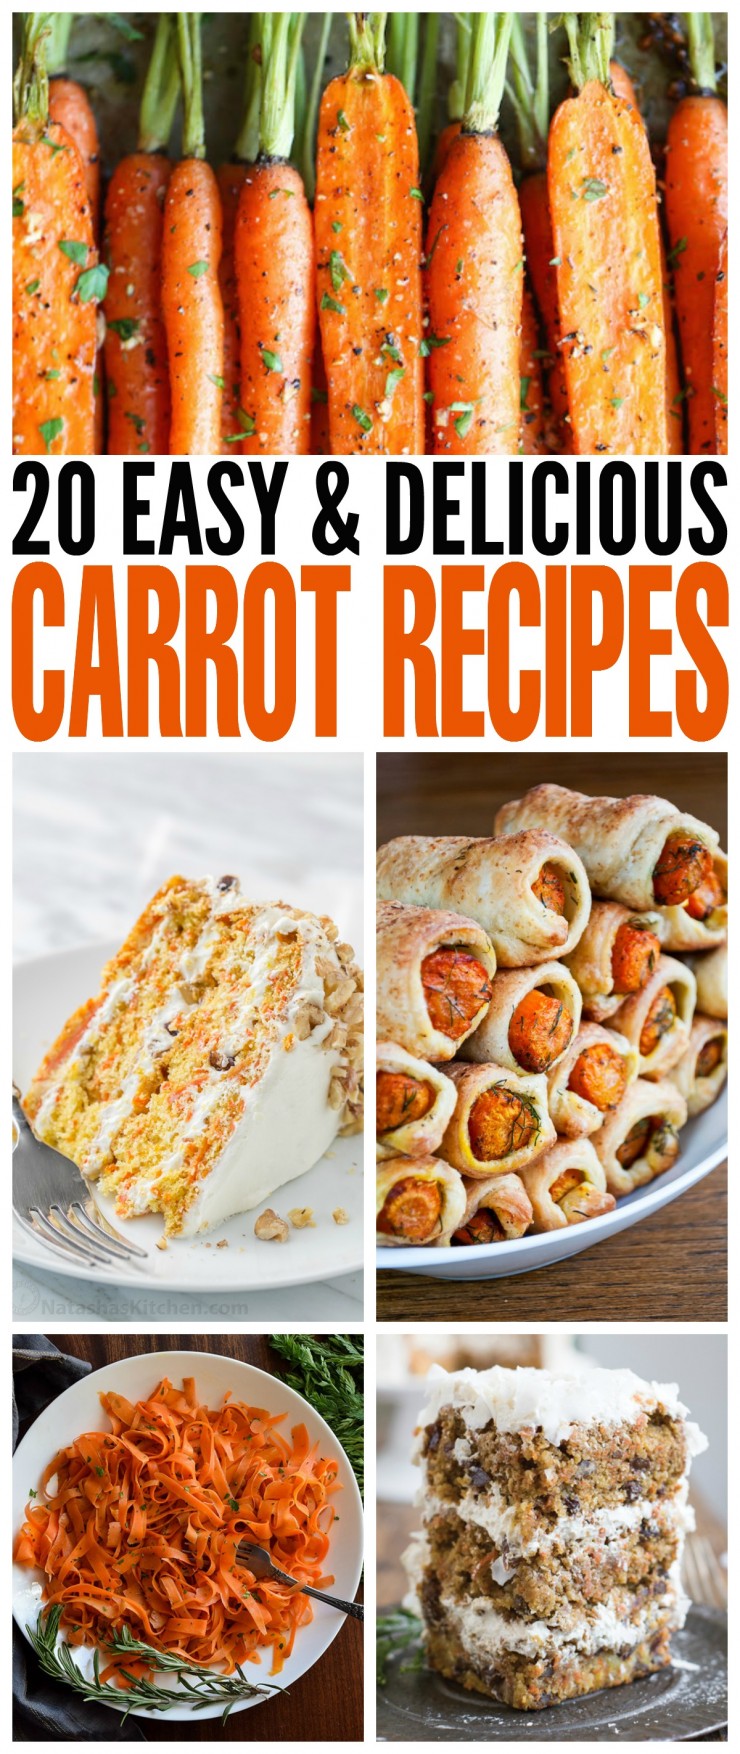 20 Easy & Delicious Carrot Recipes from Food Bloggers including roasted carrots, carrot cake, carrot muffins, carrot soup and more! Crunchy, caramelized, savoury and sweet -  we've got 20 ways to get creative in the kitchen with carrots!